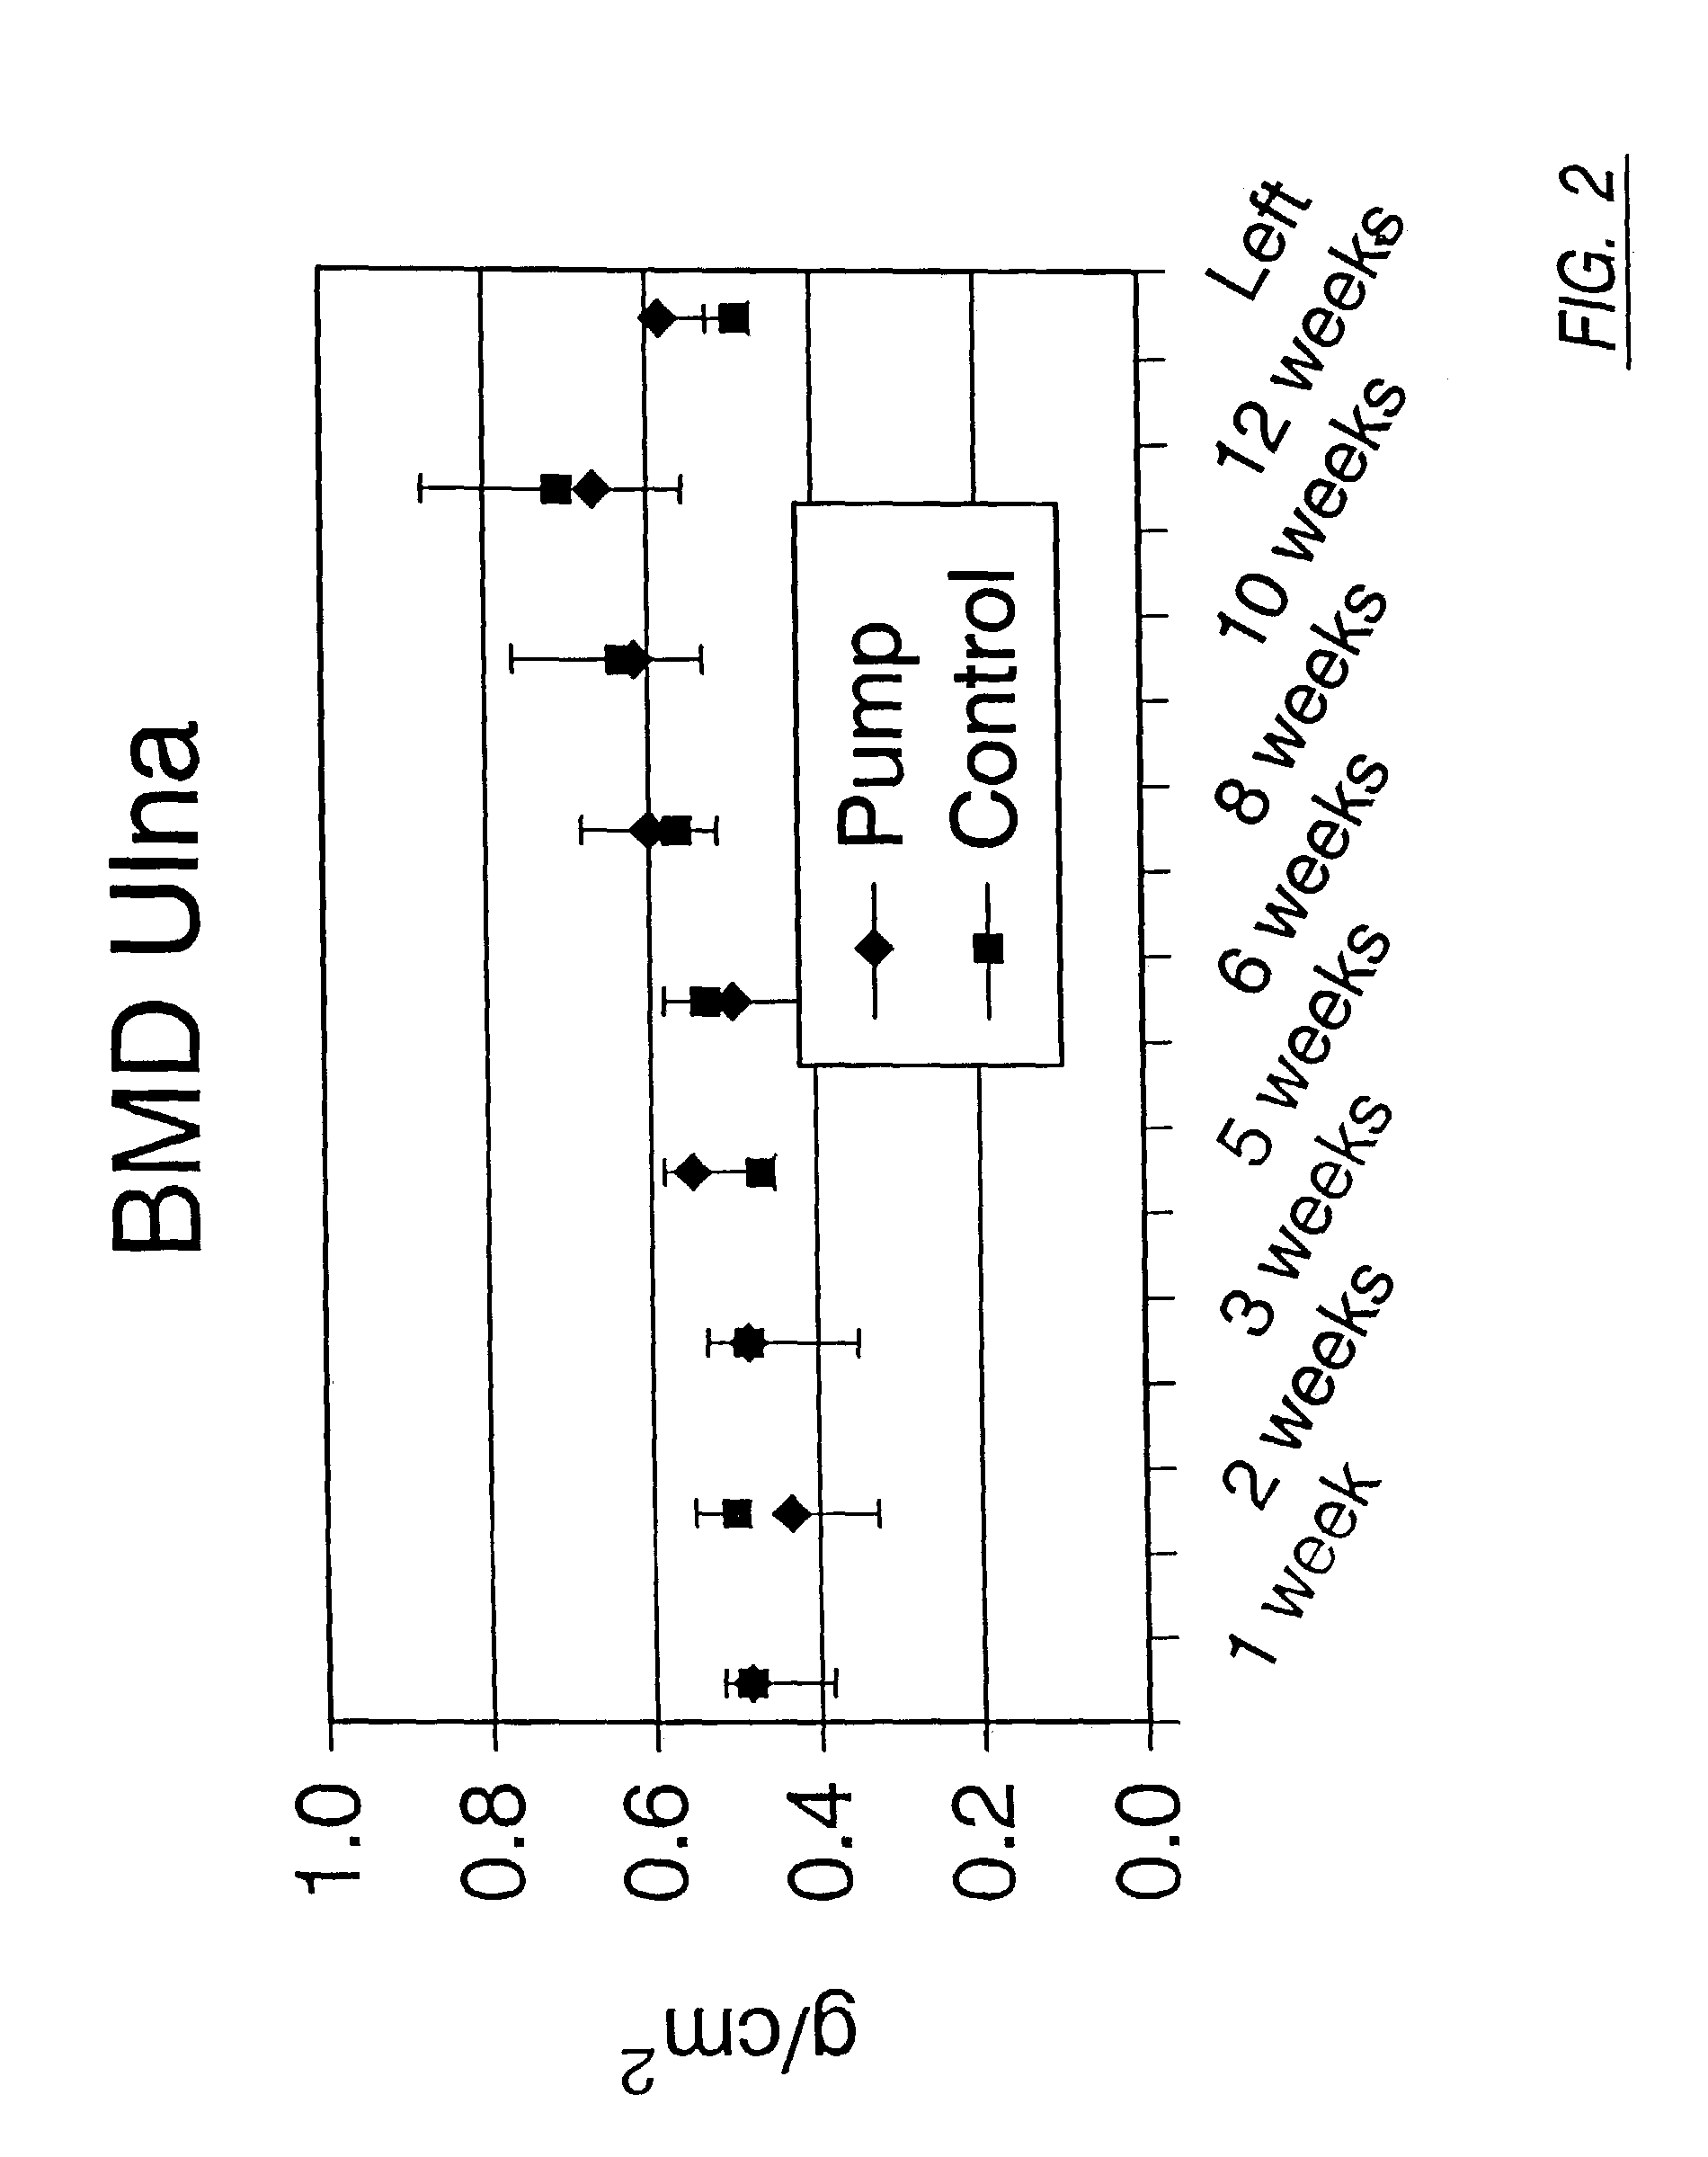 Method and apparatus for facilitating the healing of bone fractures